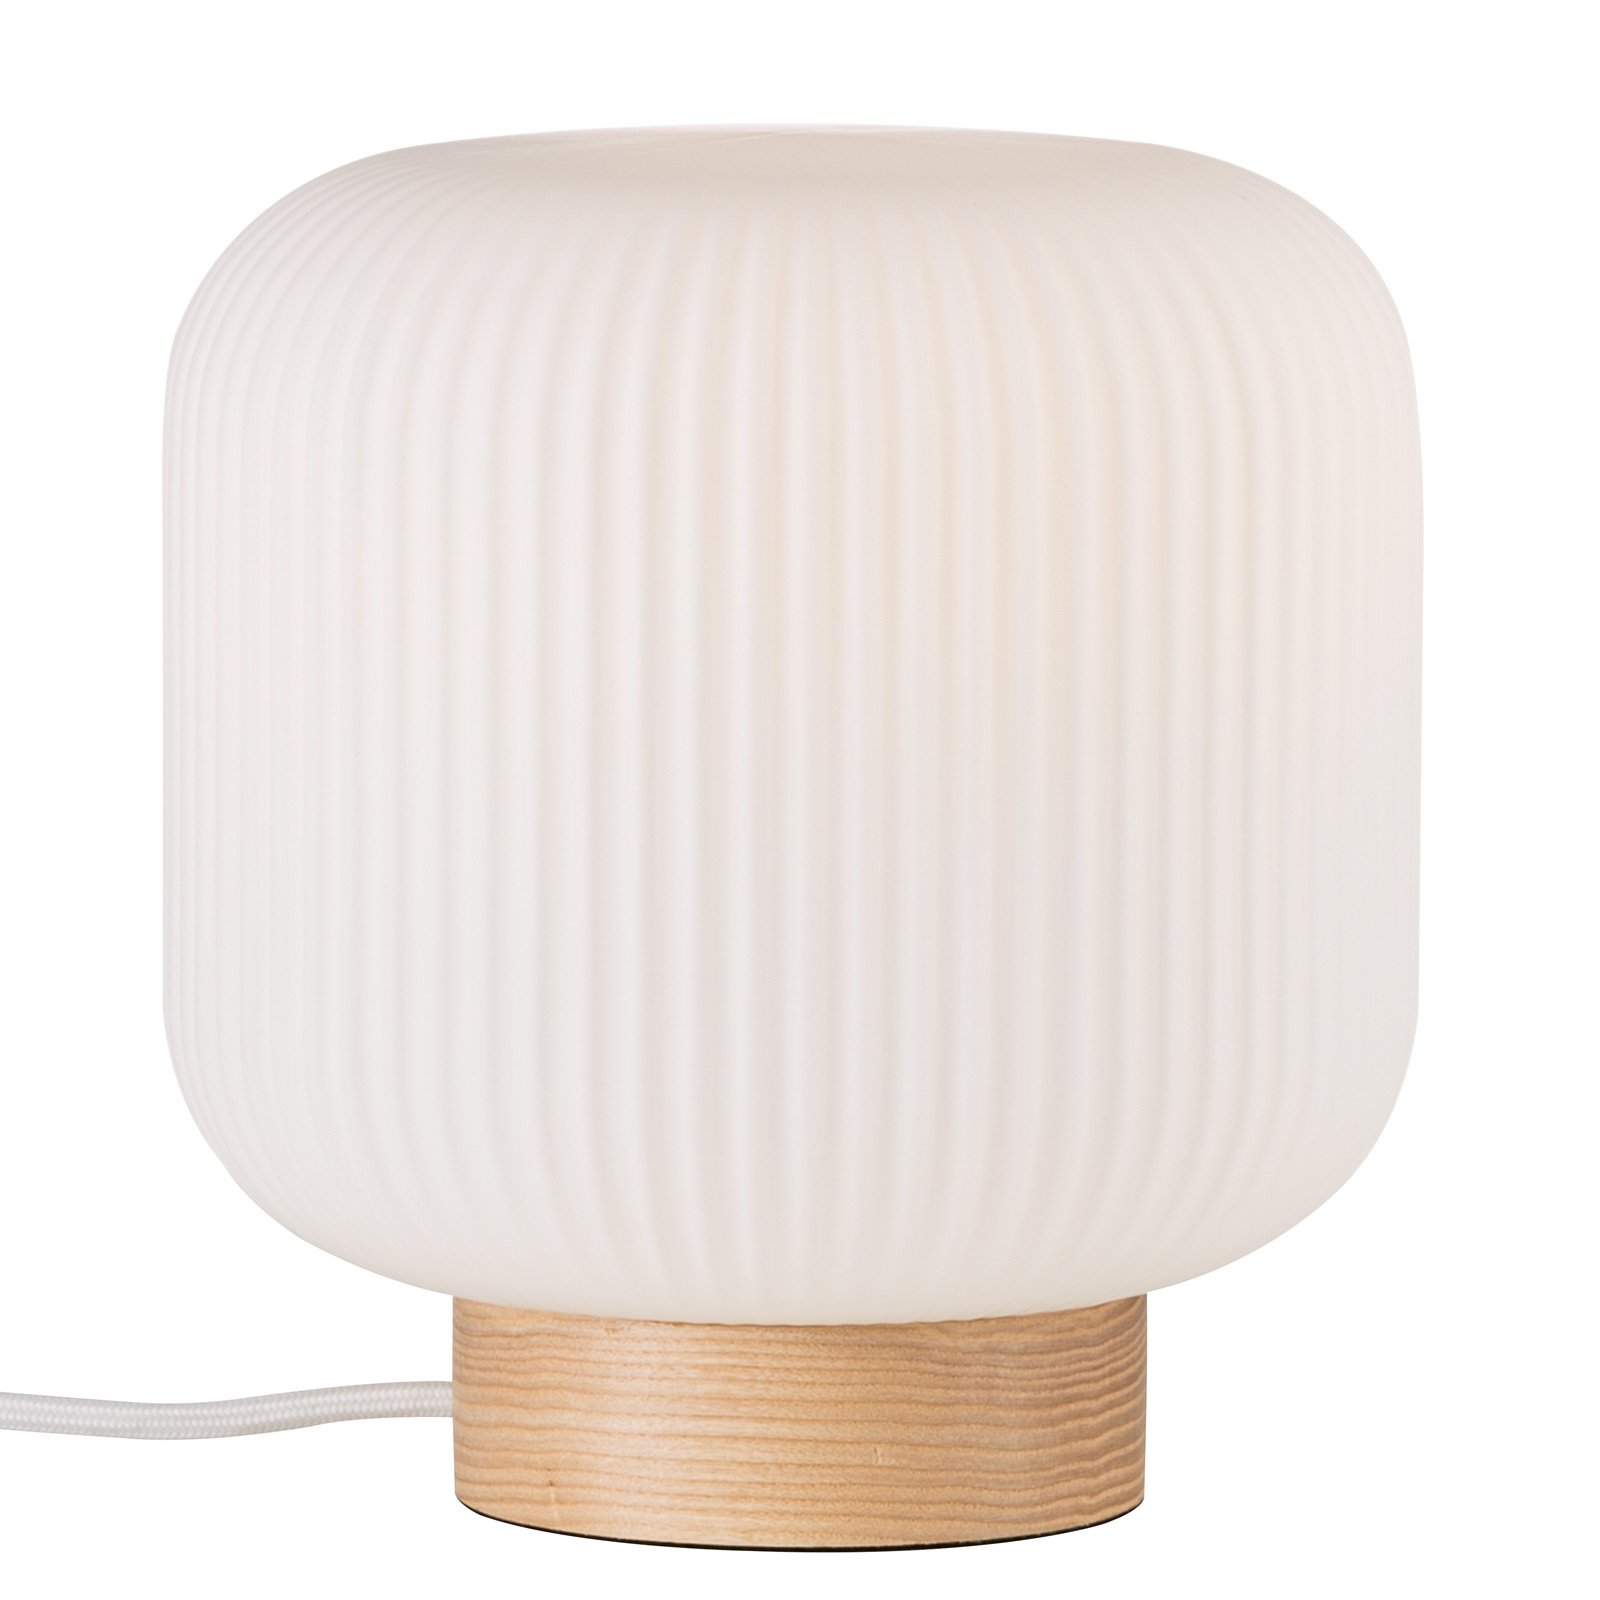 Milford table lamp, glass lampshade, wooden base